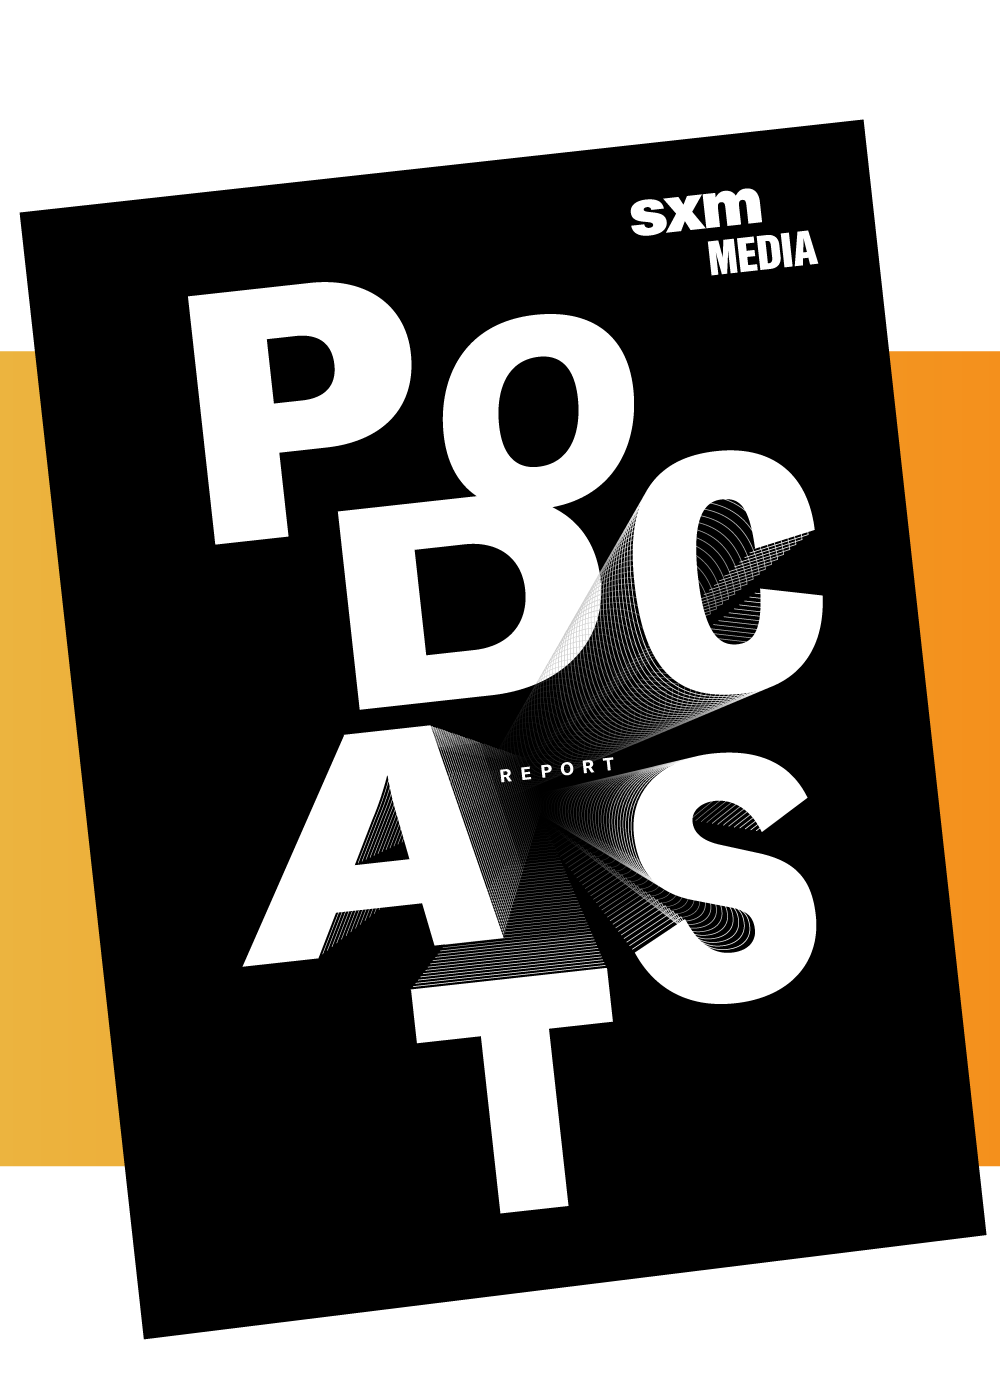 SXM Media - Podcast  - Podcast Report - Foreground